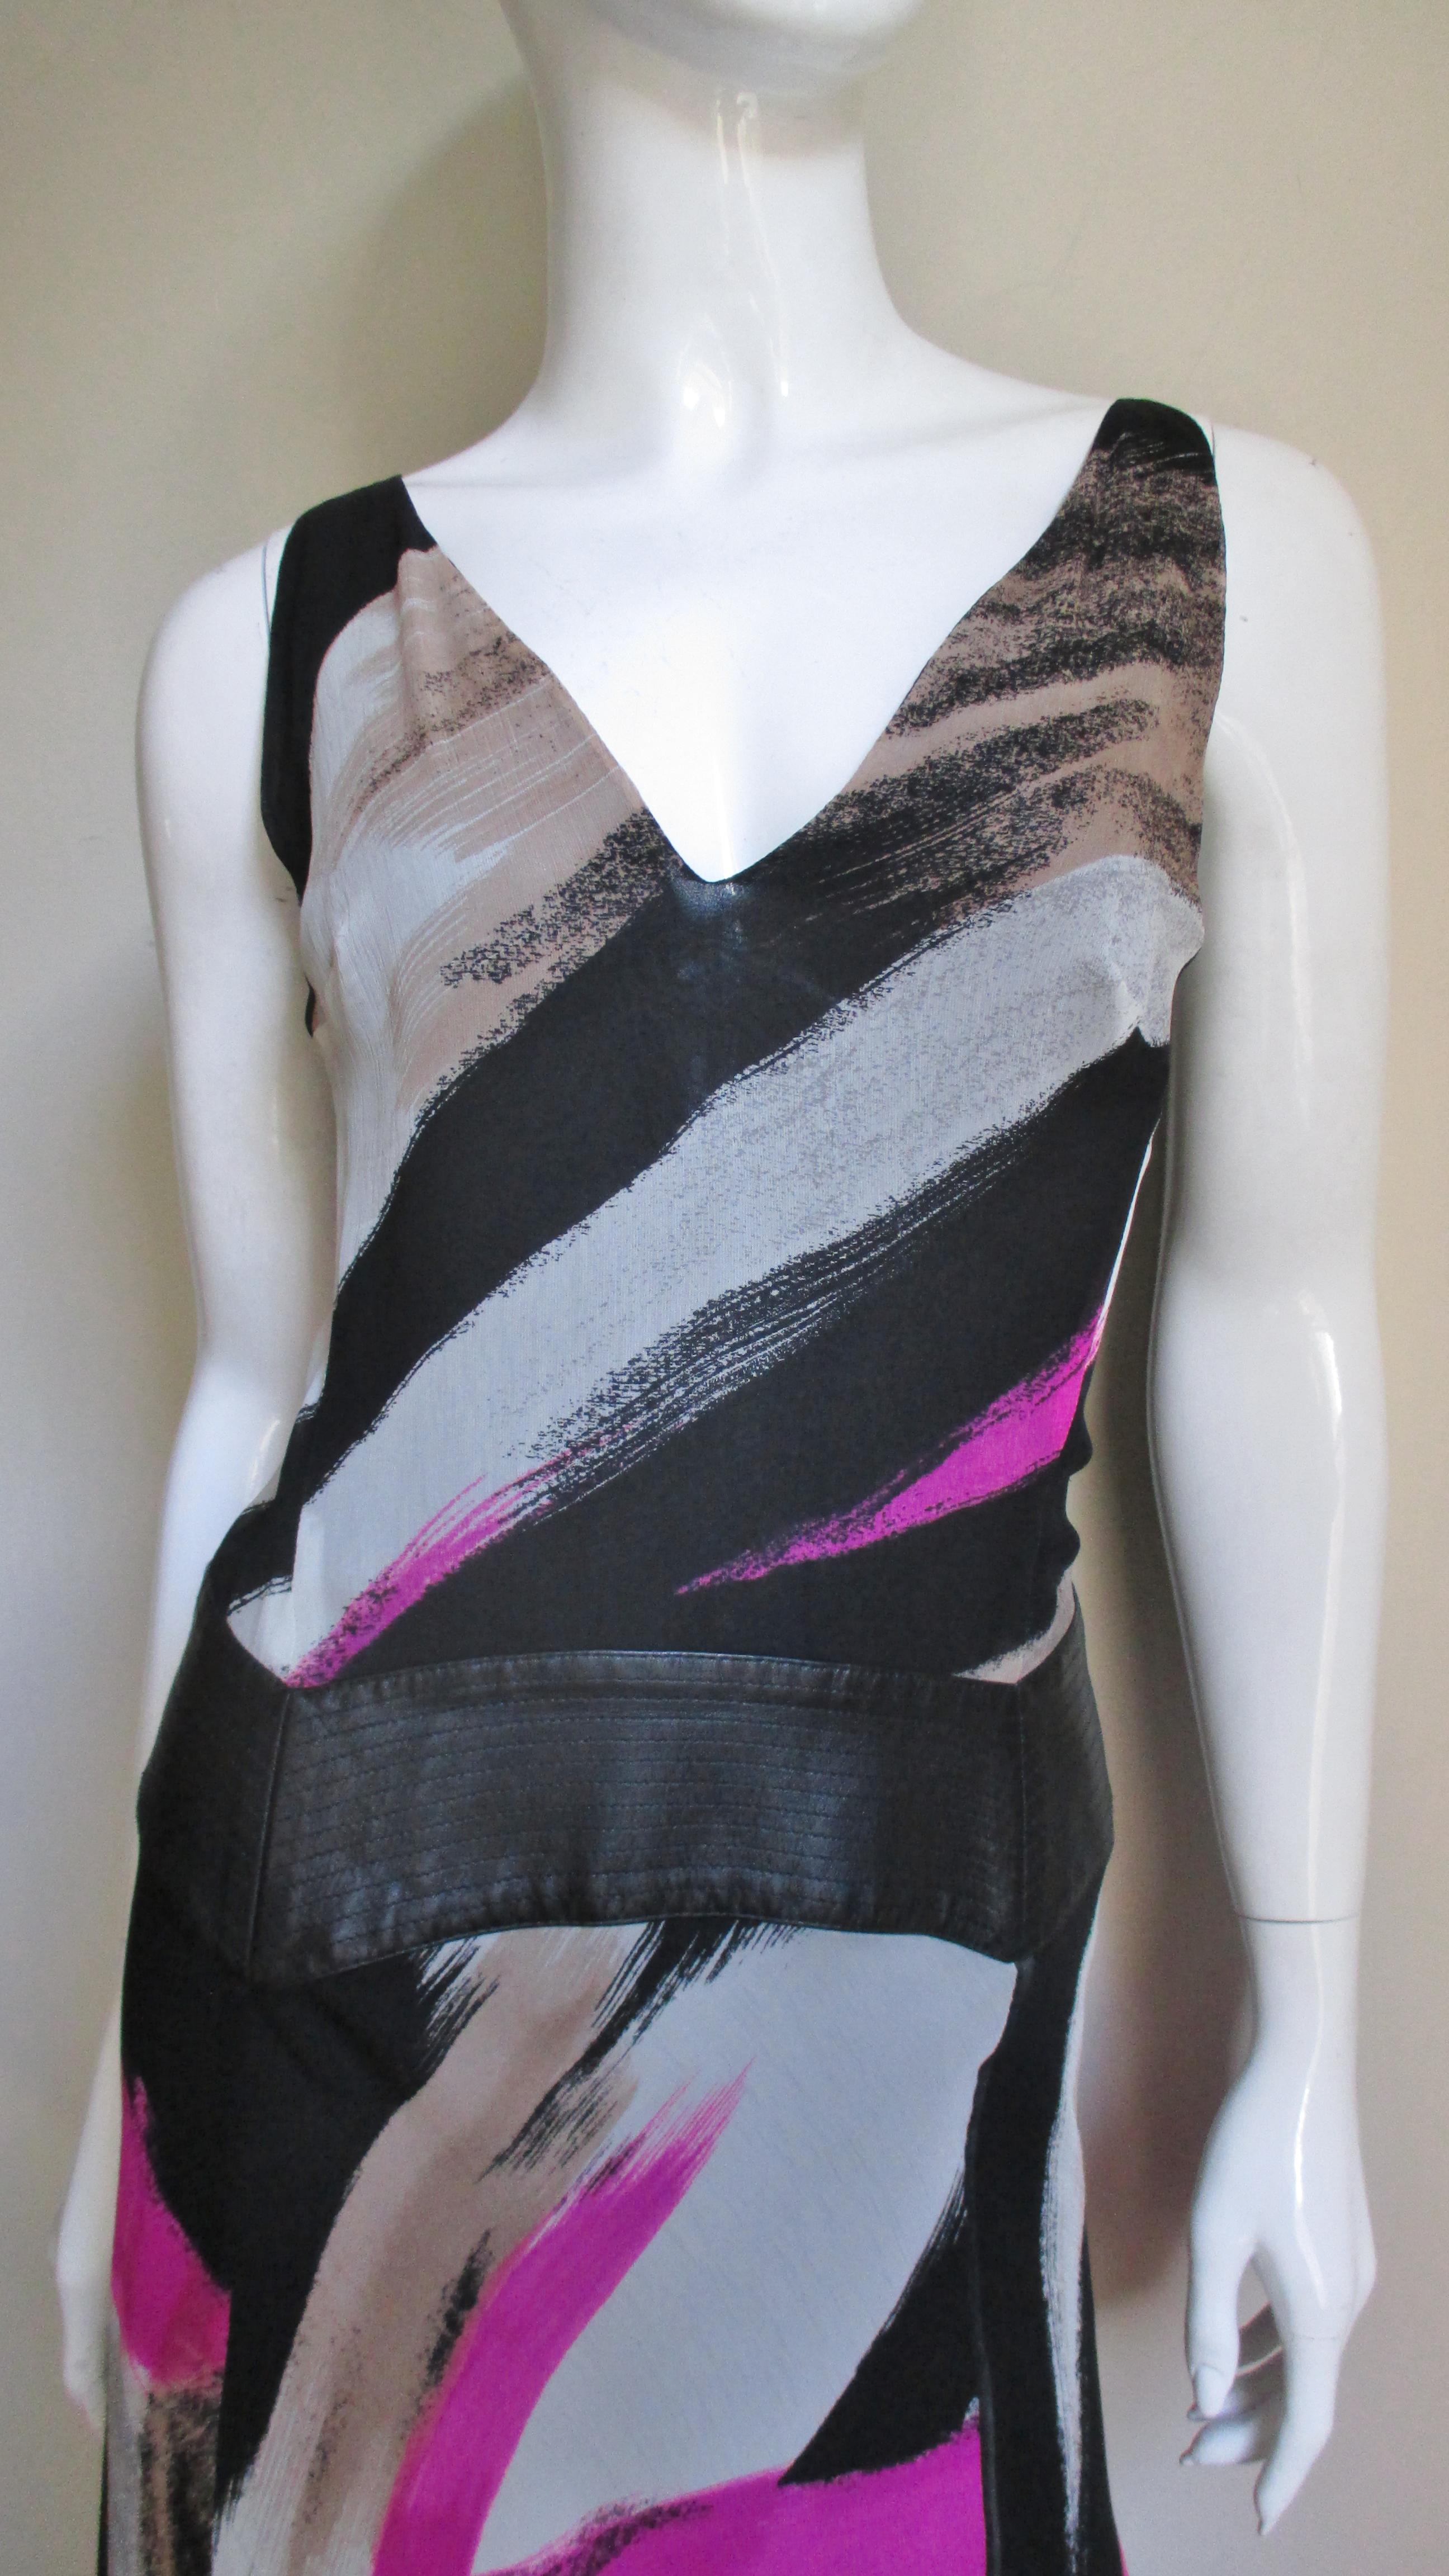 Gianni Versace Couture Silk Dress with Leather Hip Band A/W 2001 In Excellent Condition For Sale In Water Mill, NY